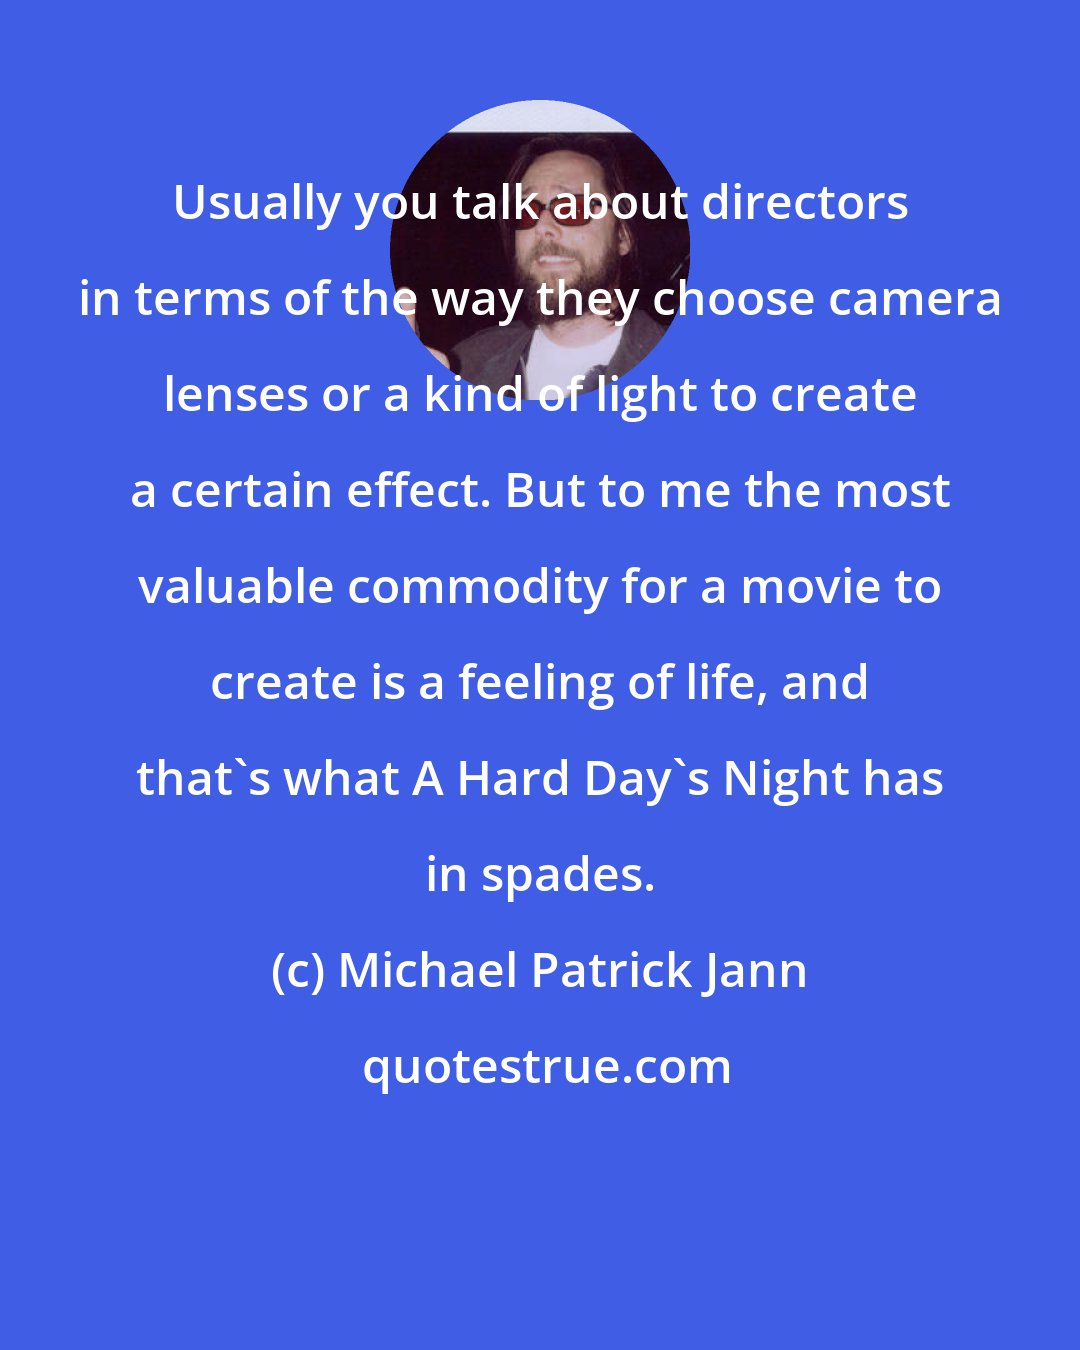 Michael Patrick Jann: Usually you talk about directors in terms of the way they choose camera lenses or a kind of light to create a certain effect. But to me the most valuable commodity for a movie to create is a feeling of life, and that's what A Hard Day's Night has in spades.